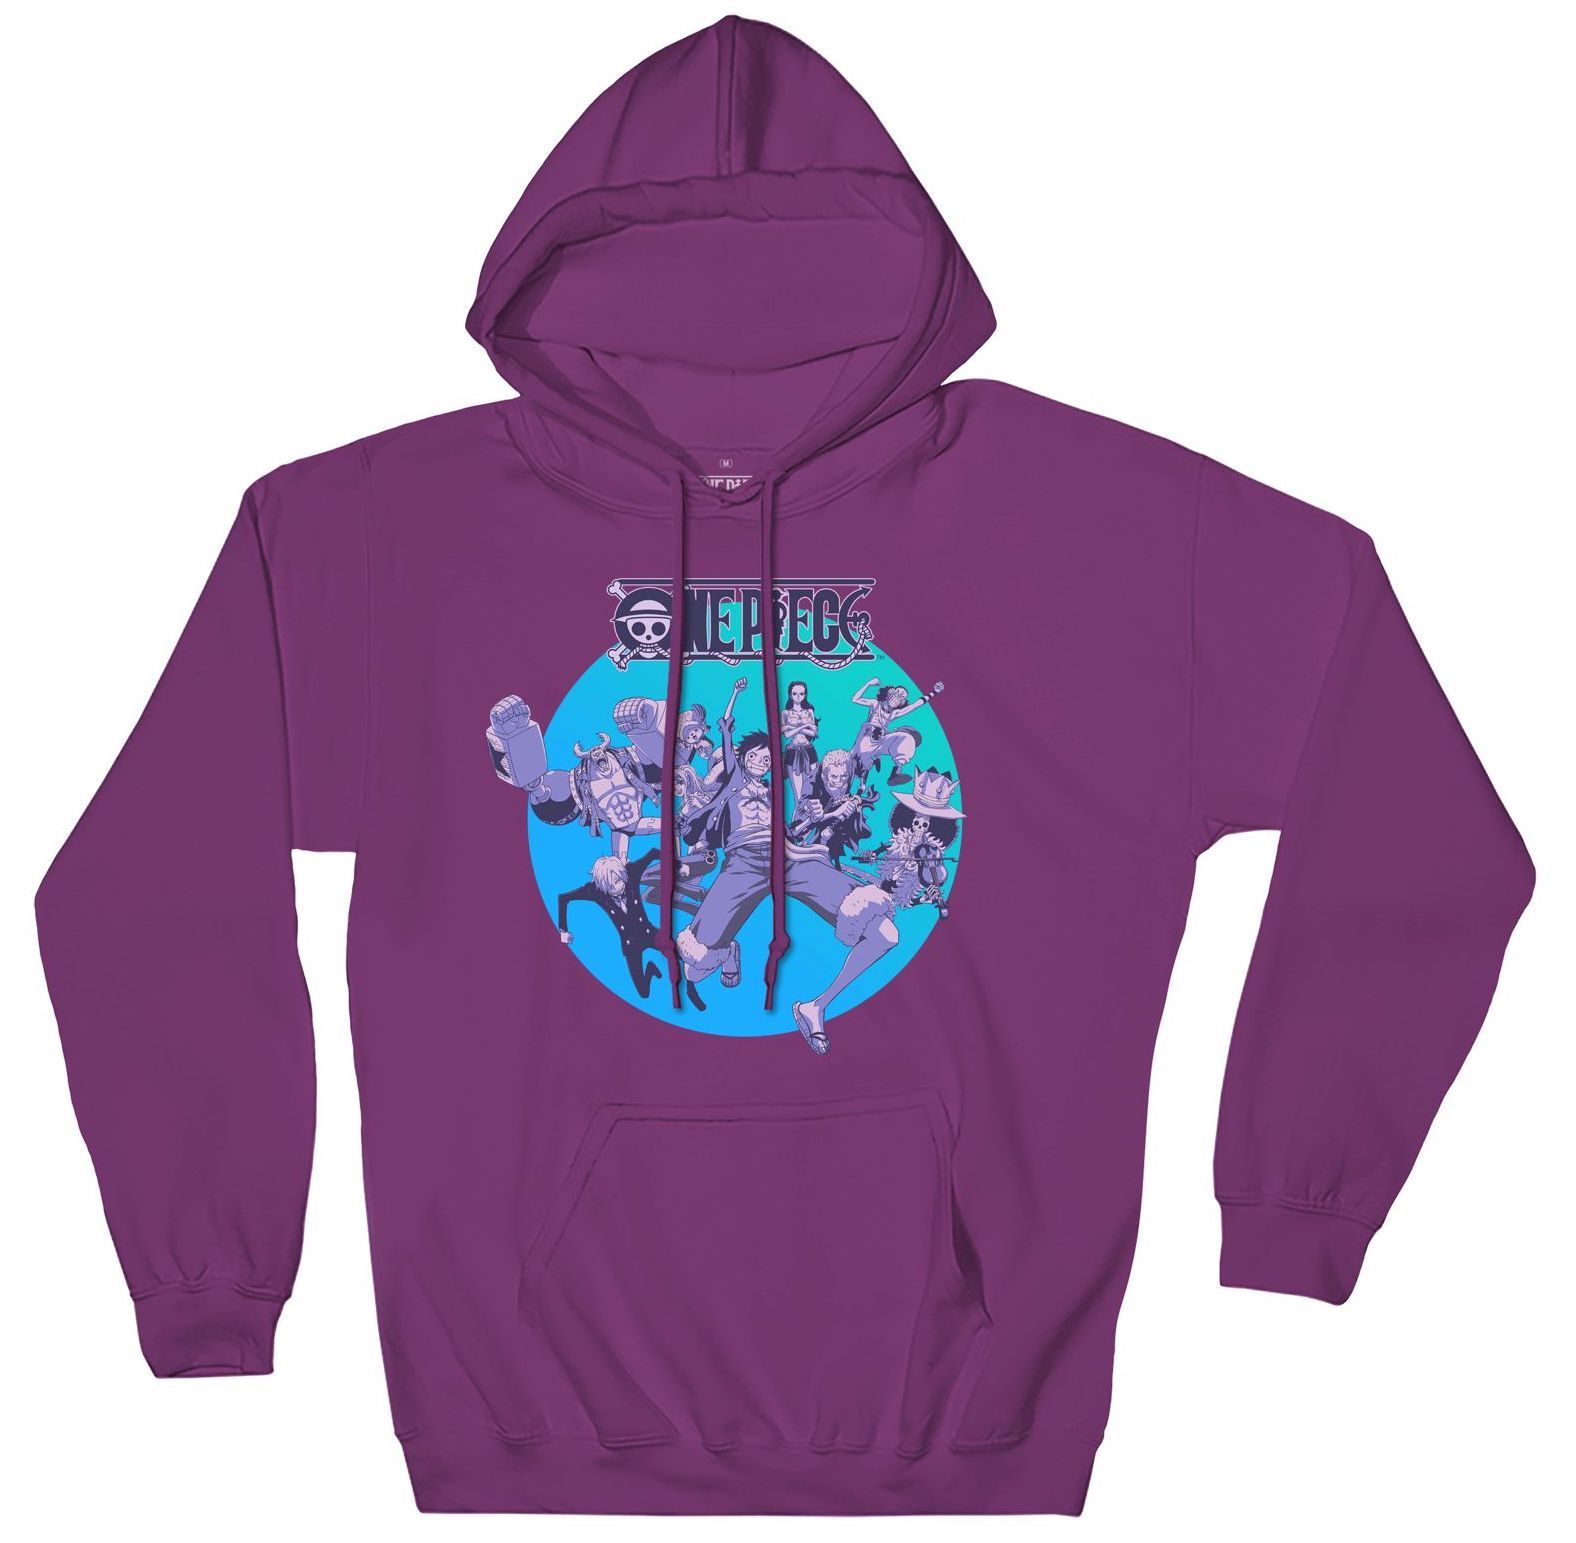 One Piece - Round Group Hoodie - Crunchyroll Exclusive